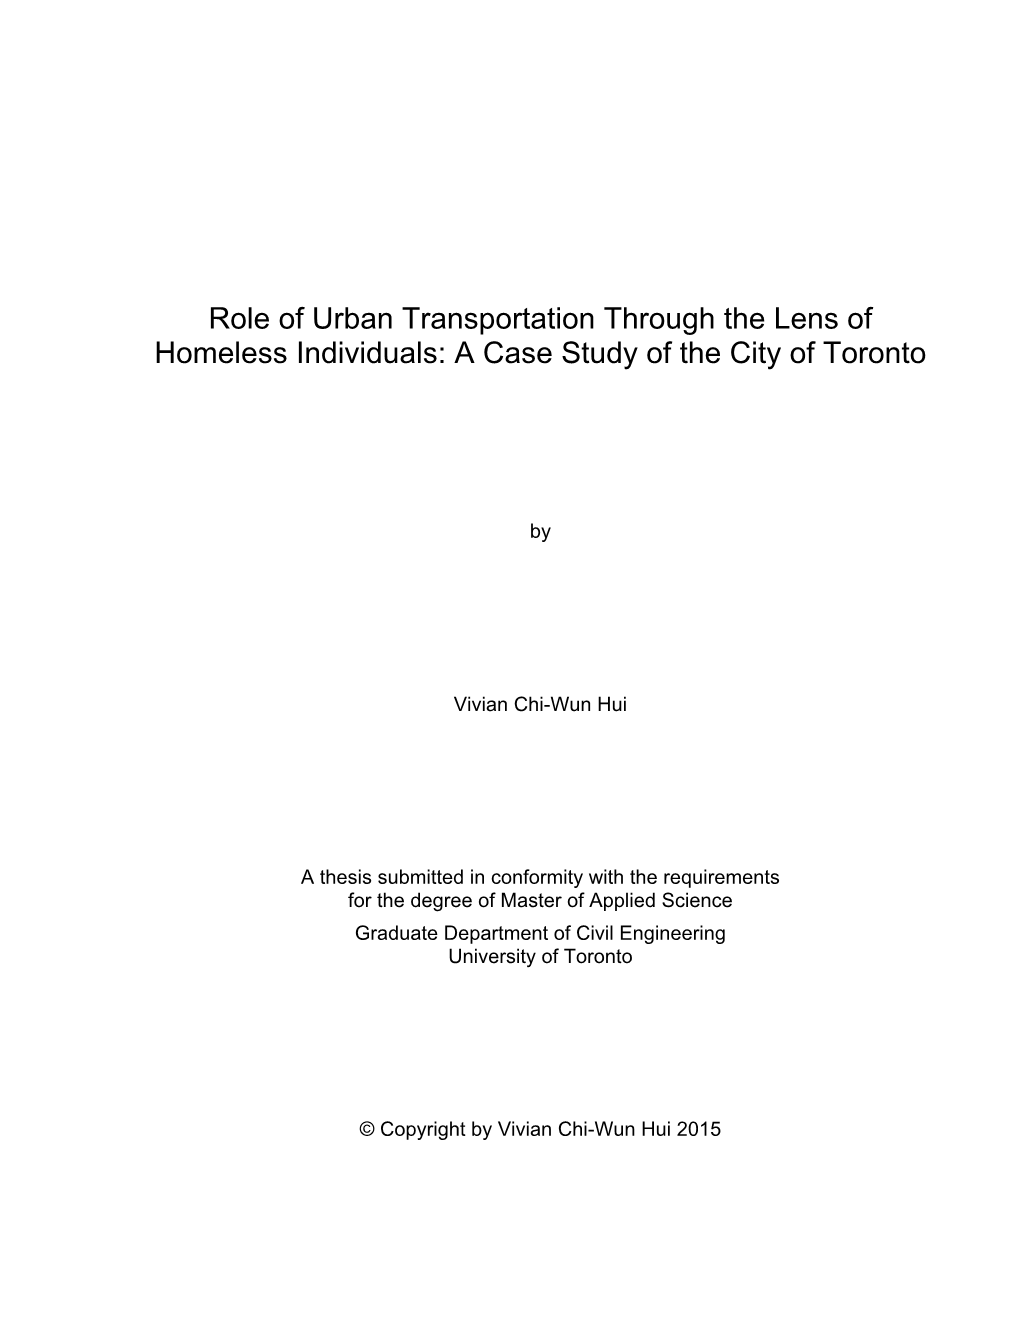 Role of Urban Transportation Through the Lens of Homeless Individuals: a Case Study of the City of Toronto